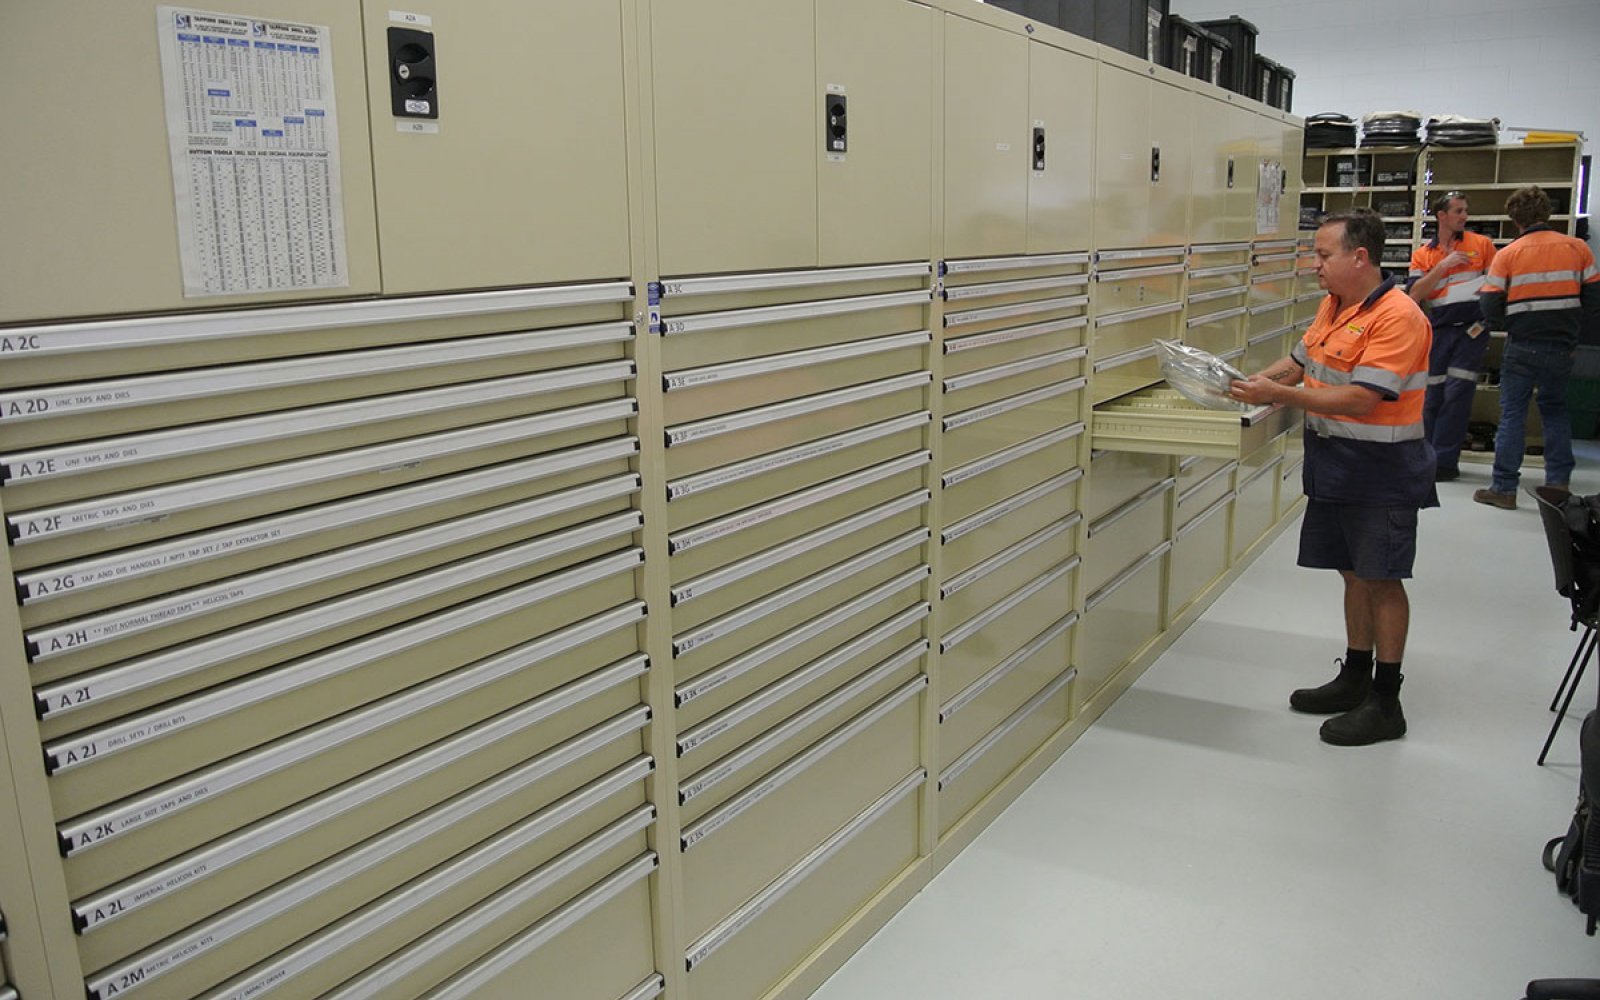 Full height Warehouse cabinets, with lockable doors on top - BAC 'A' 2100 Series